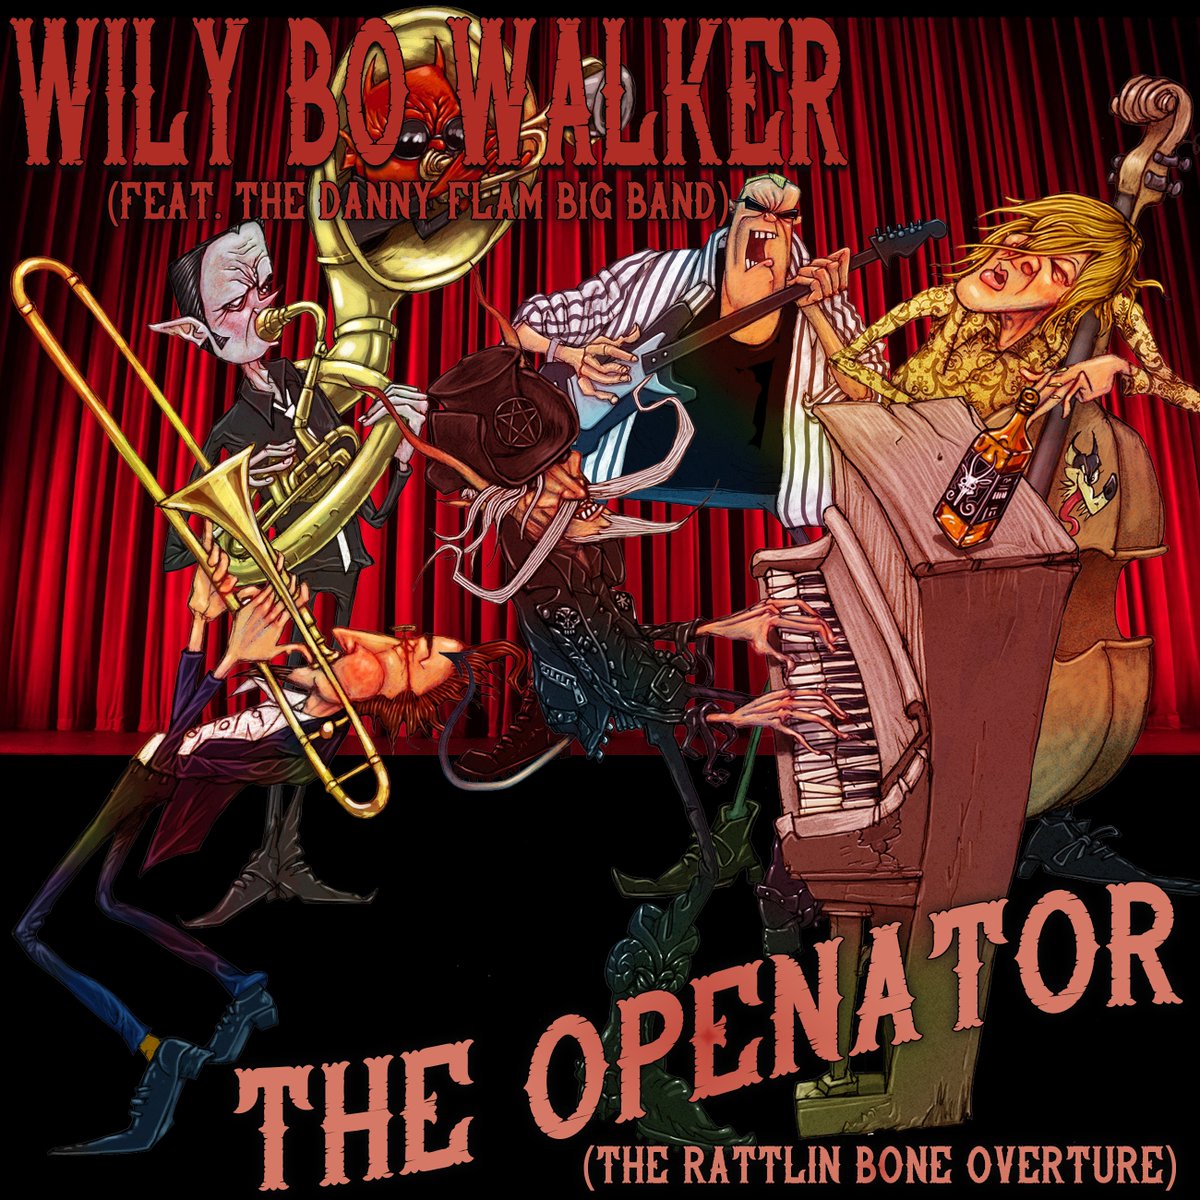 “While playing jazz You always has A welcome mat…” Fourth single release from ‘The Rattlin Bone Theatre Show’ soundtrack album is the instrumental overture to the show & features The Danny Flam Big Band Artwork © @SteveArtyPerson wilybo.bandcamp.com/album/the-open… #jazz #theatre